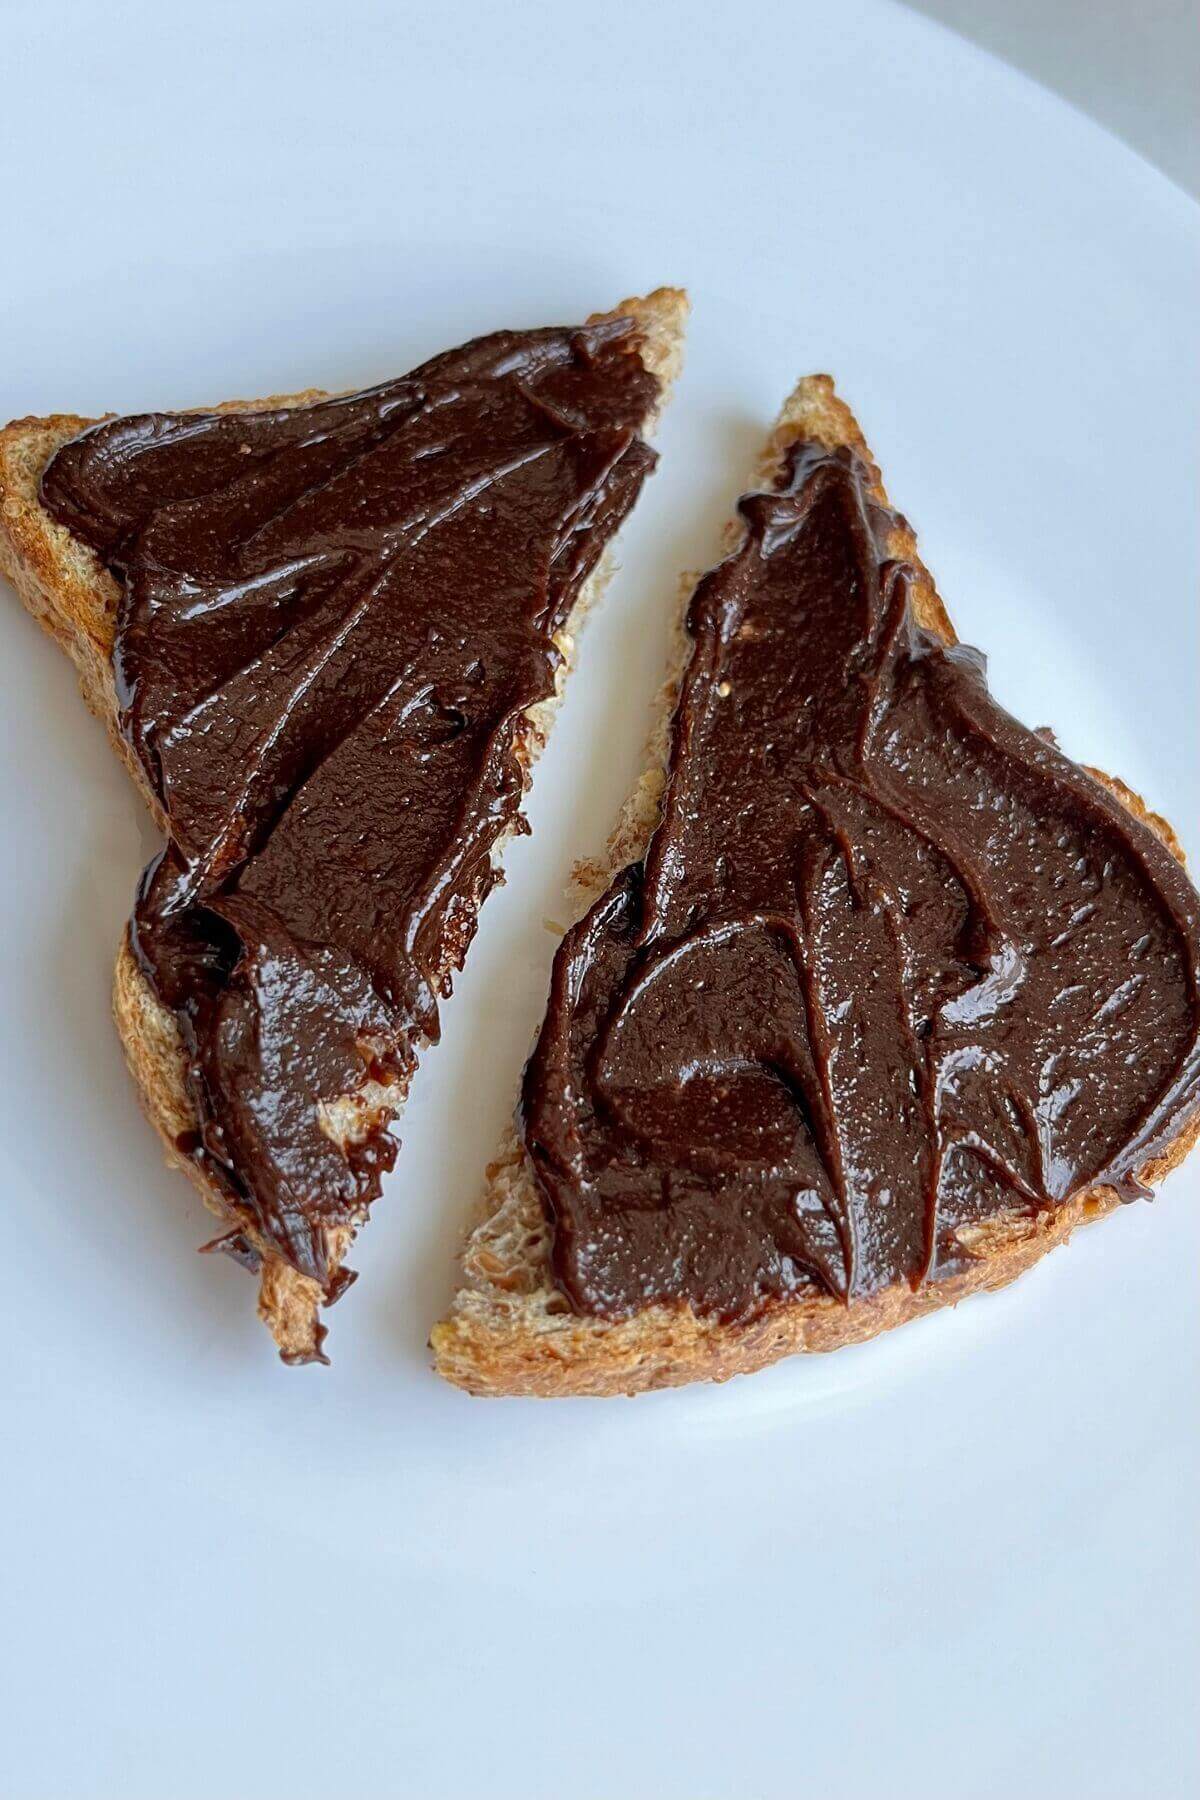 Toast slathered in carob frosting on a white plate.